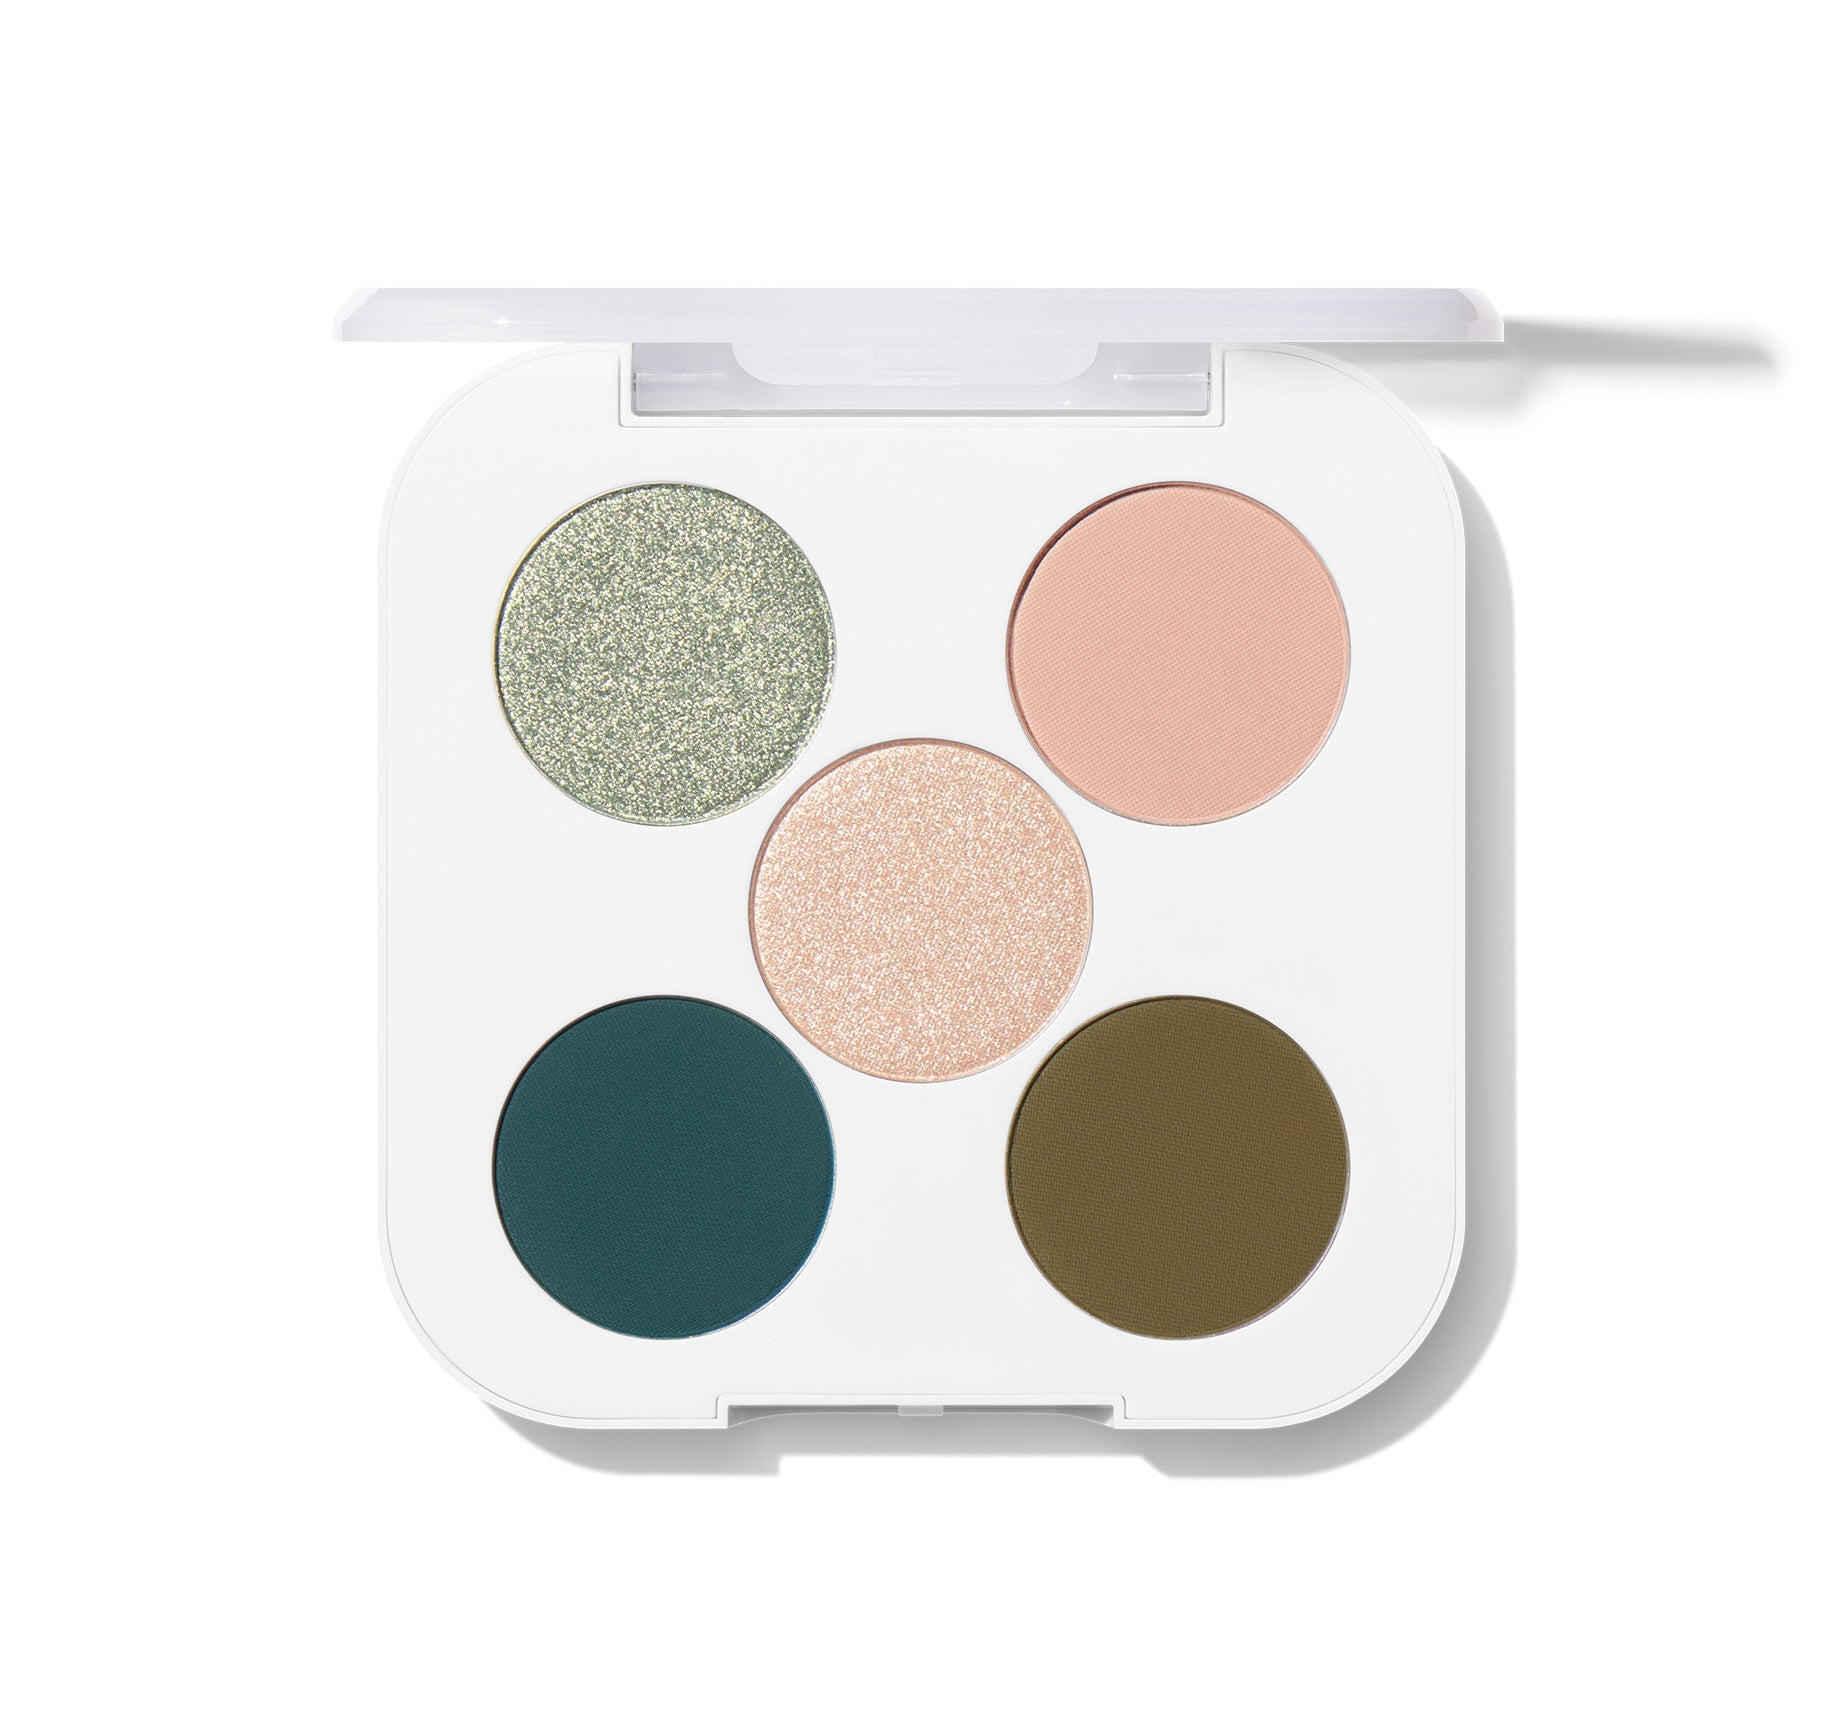 Ready In 5 Eyeshadow Palette - Welcome To Miami - Image 1